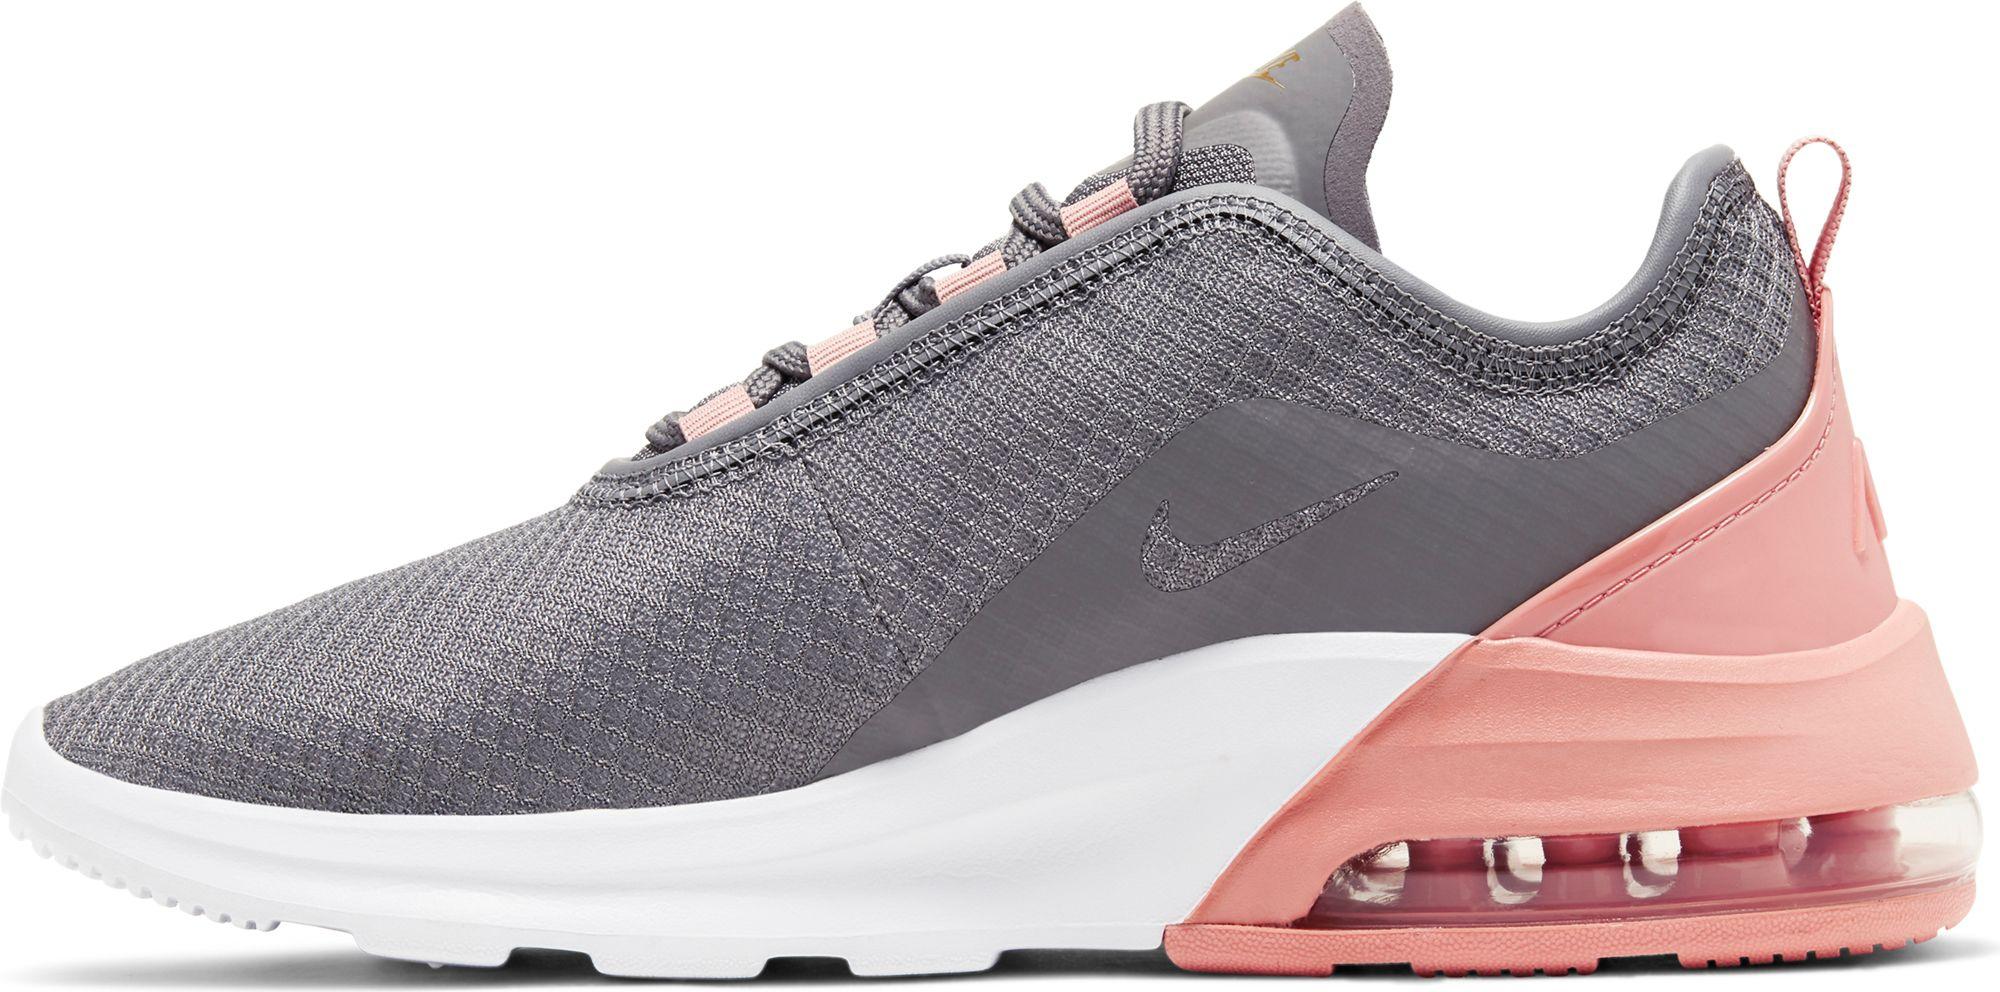 Nike Air Max Motion 2 Shoes in Grey/Peach (Gray) | Lyst